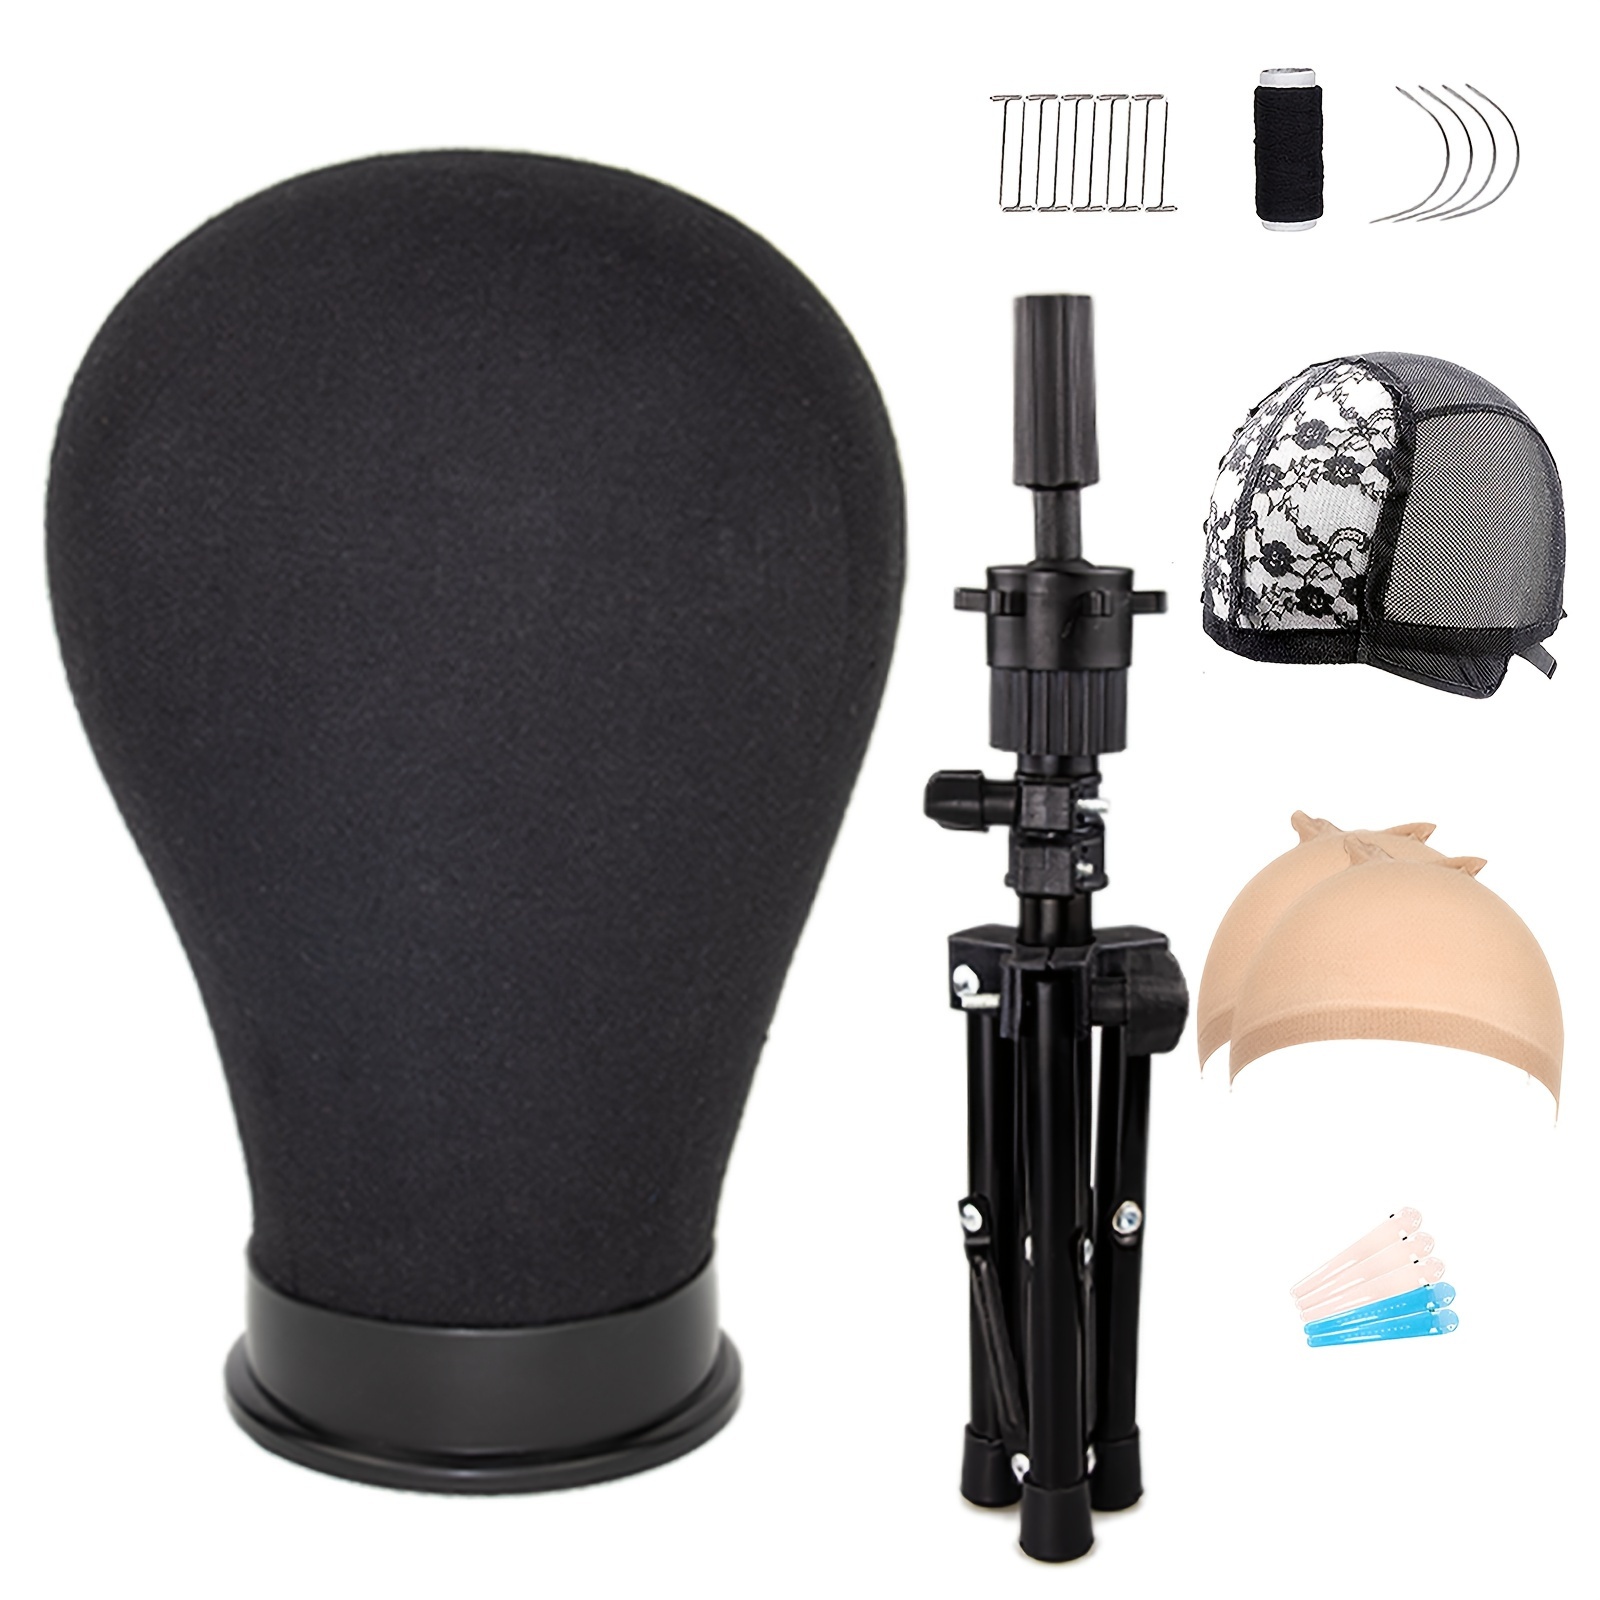 23 Inch Canvas Wig Head,Wig Stand Tripod with Head,Mannequin Head for Wigs  Making Display with Wig caps,T Pins Set,Bristle Brush(Black)